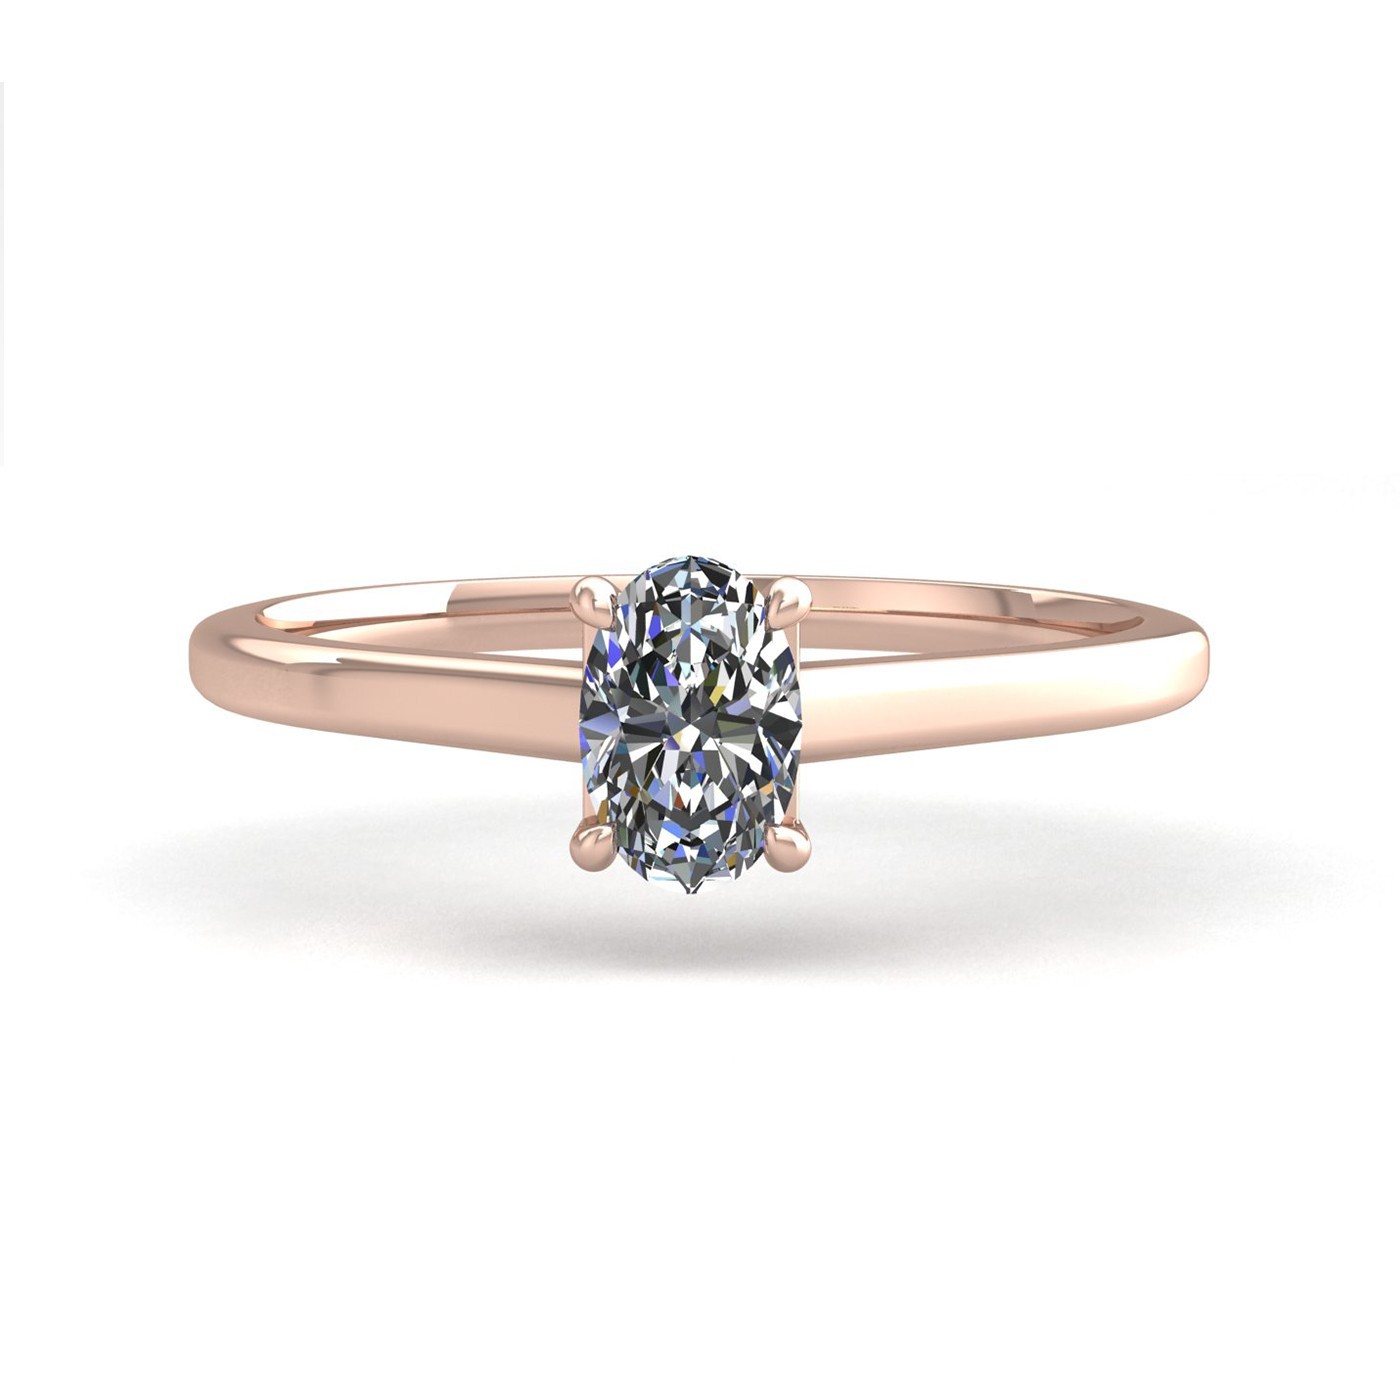 18k rose gold  2,50 ct 4 prongs solitaire oval cut diamond engagement ring with whisper thin band Photos & images